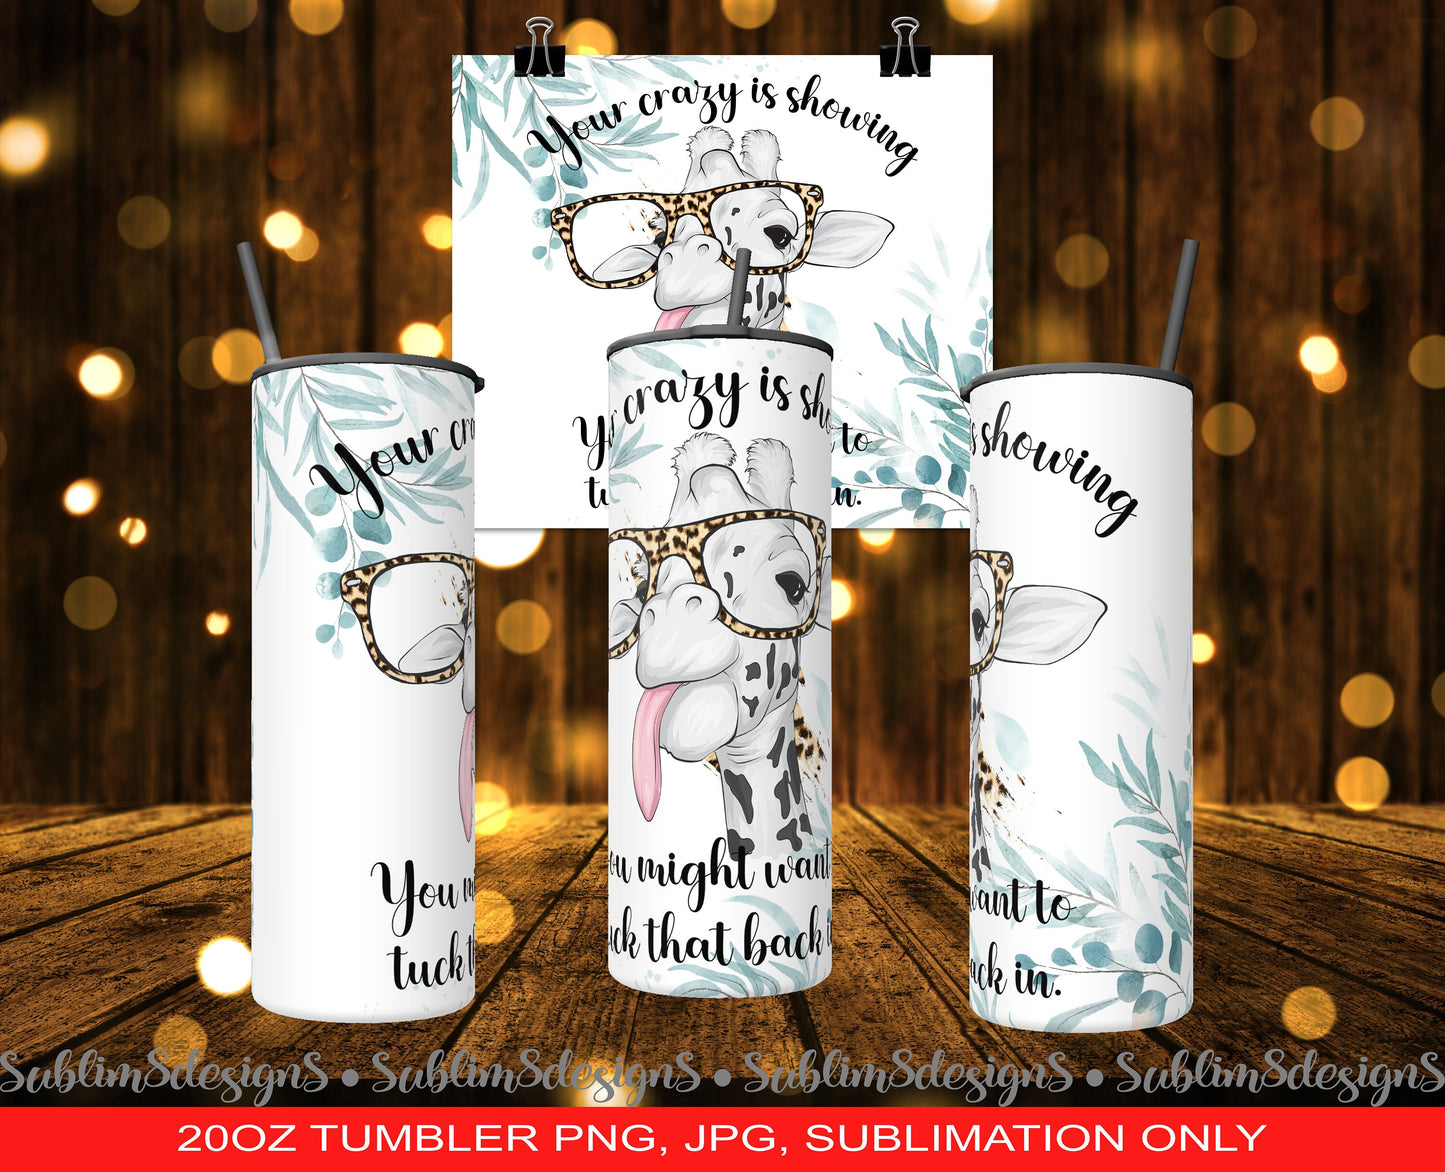 Your Crazy Is Showing You Might Want To Tuck That Back In 20 oz Tumbler Wrap | Giraffe Poison | Animal | Sublimation Design PNG and JPG ONLY